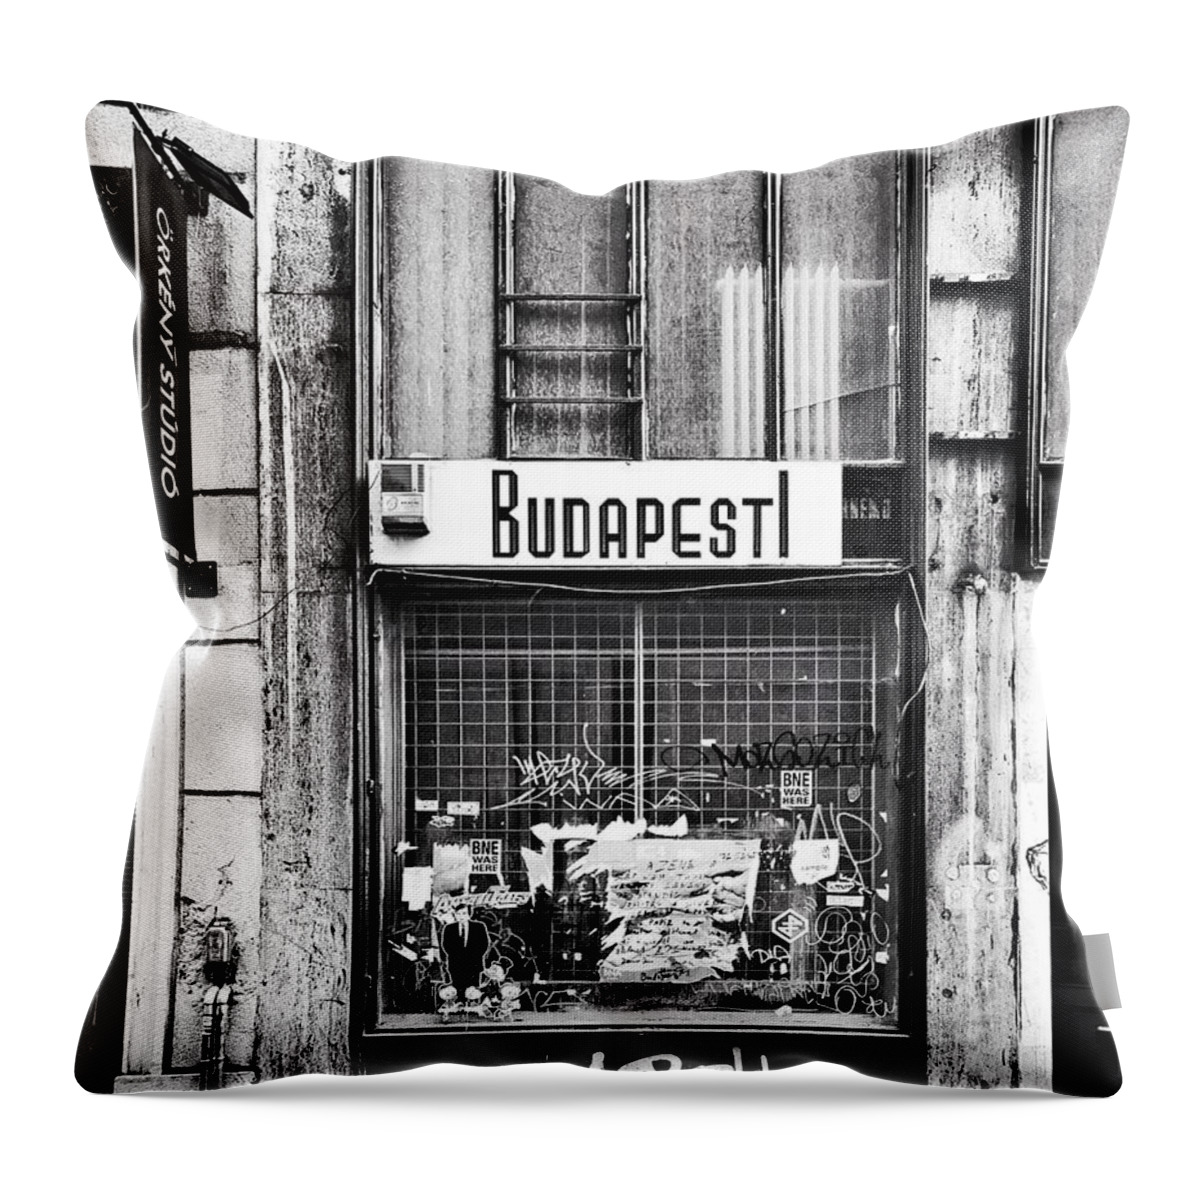 Budapest Throw Pillow featuring the photograph Budapest Street Scene by Tito Slack